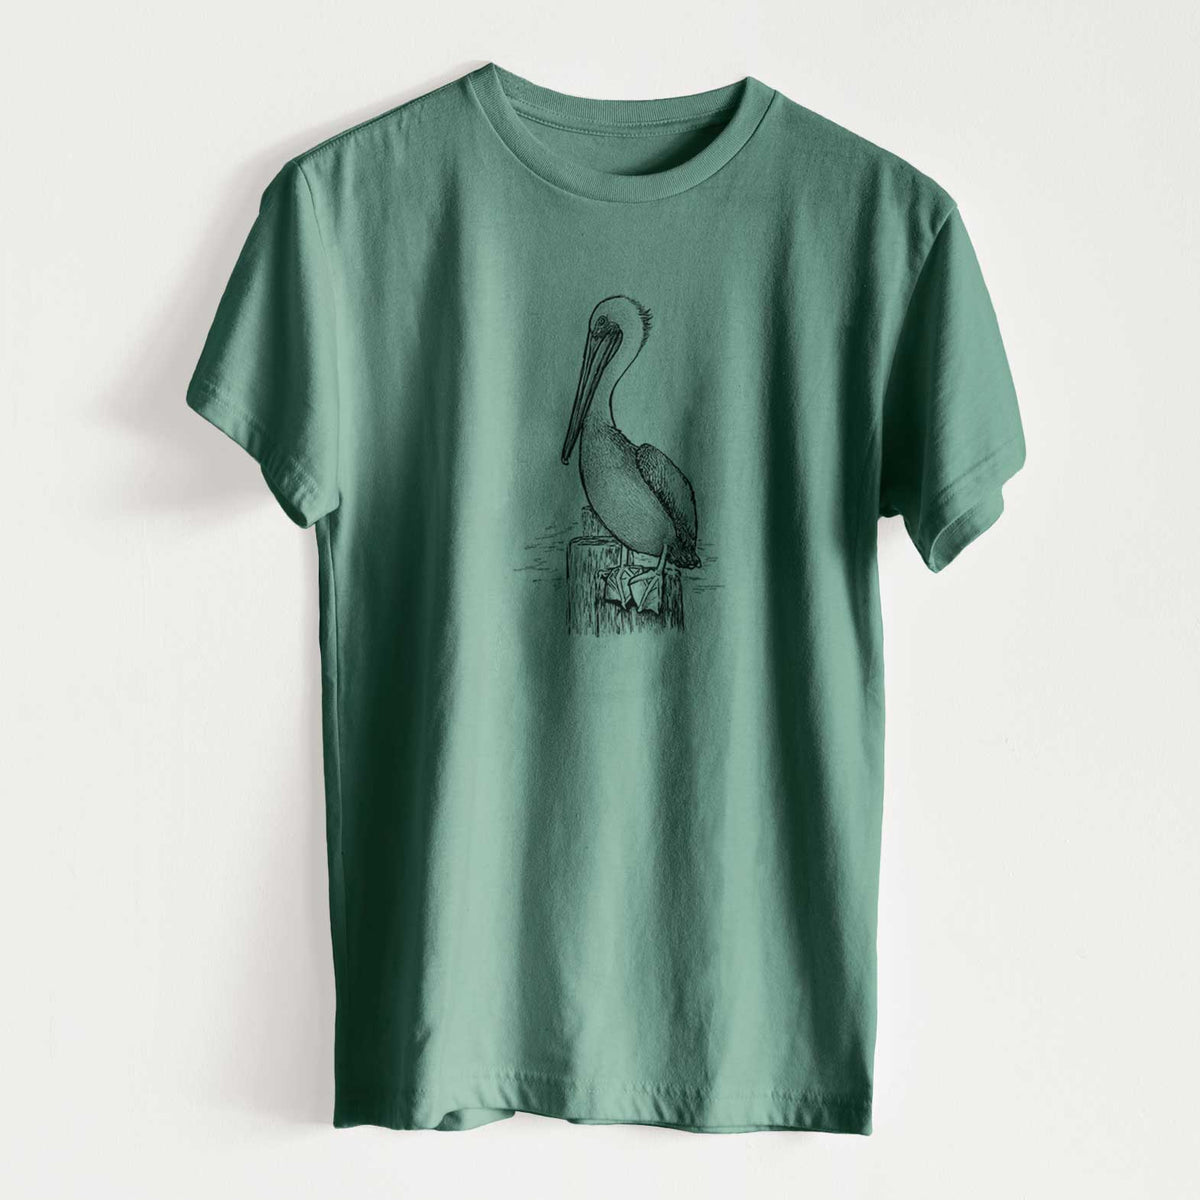 Pelecanus occidentalis - Brown Pelican - Unisex Recycled Eco Tee  - CLOSEOUT - FINAL SALE